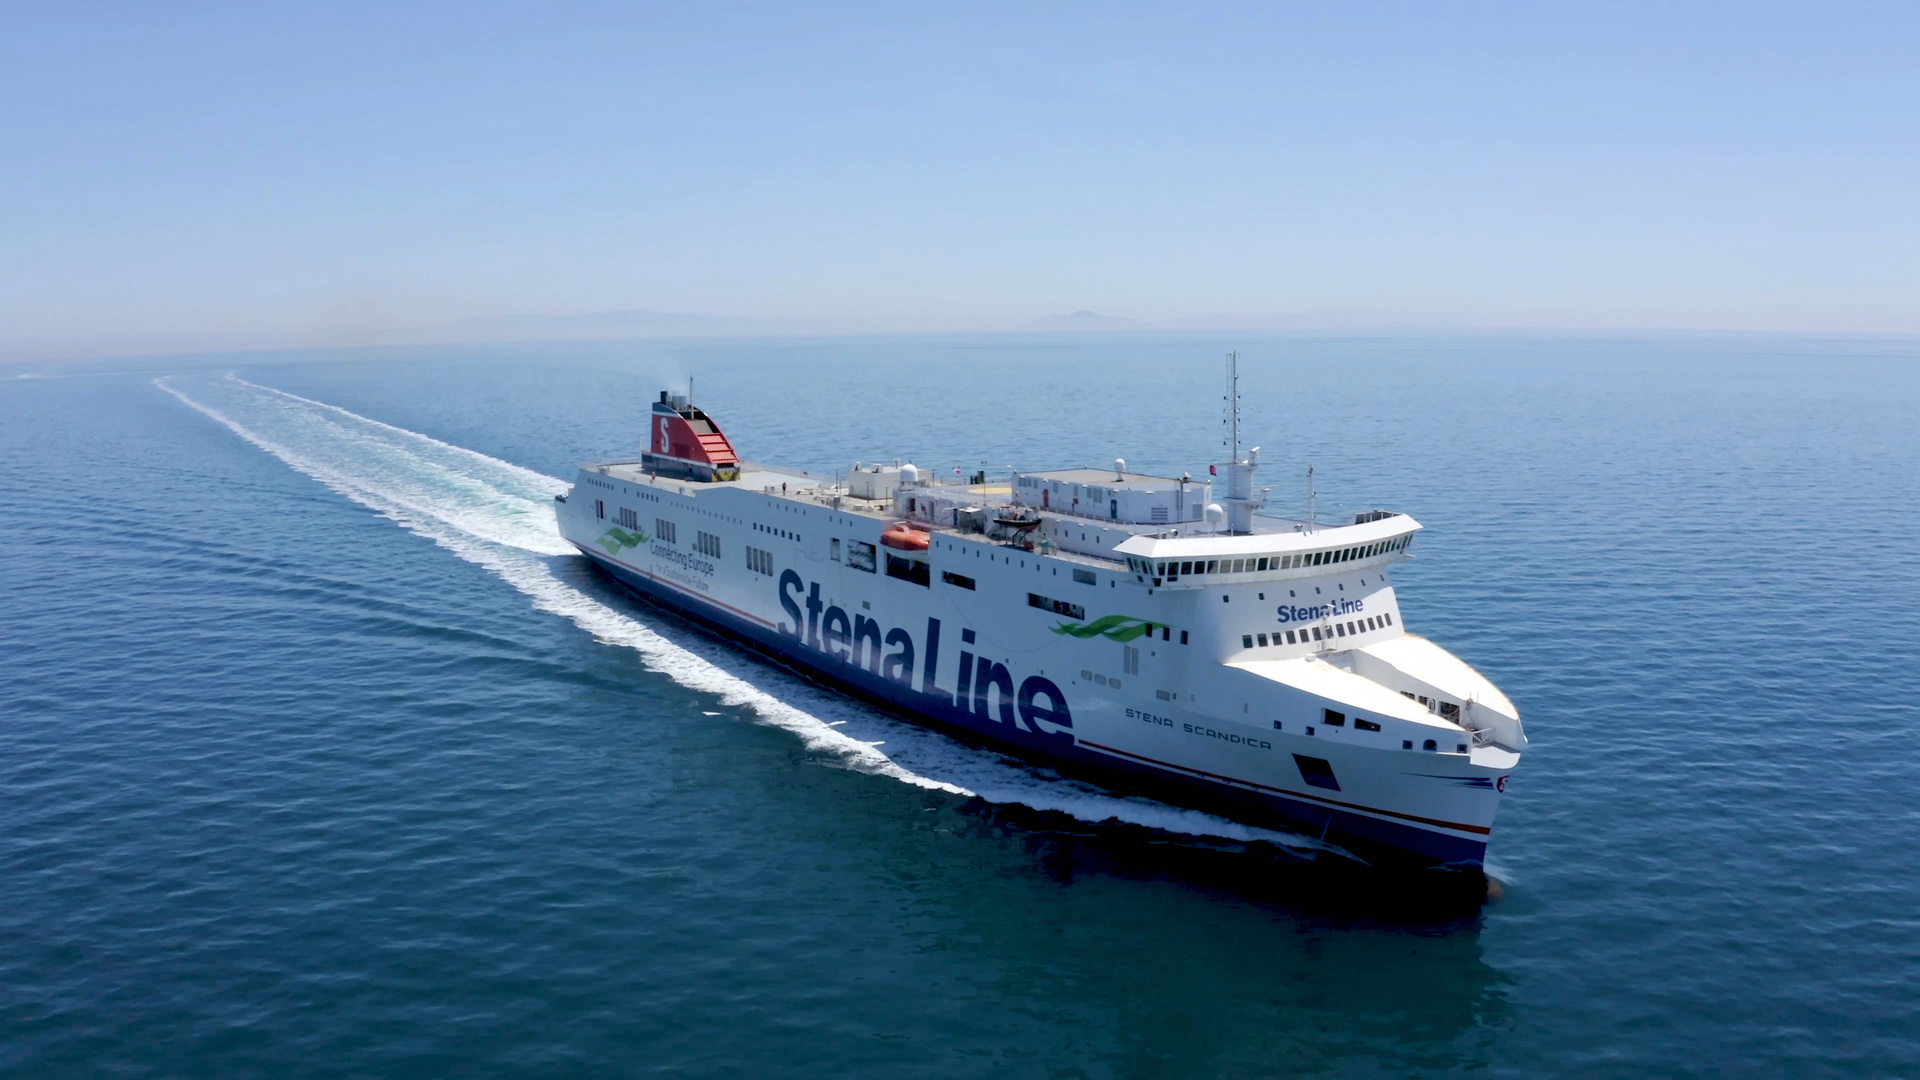 Ferry: Stena Line, Baltic, Water transport for vehicles. 1920x1080 Full HD Background.